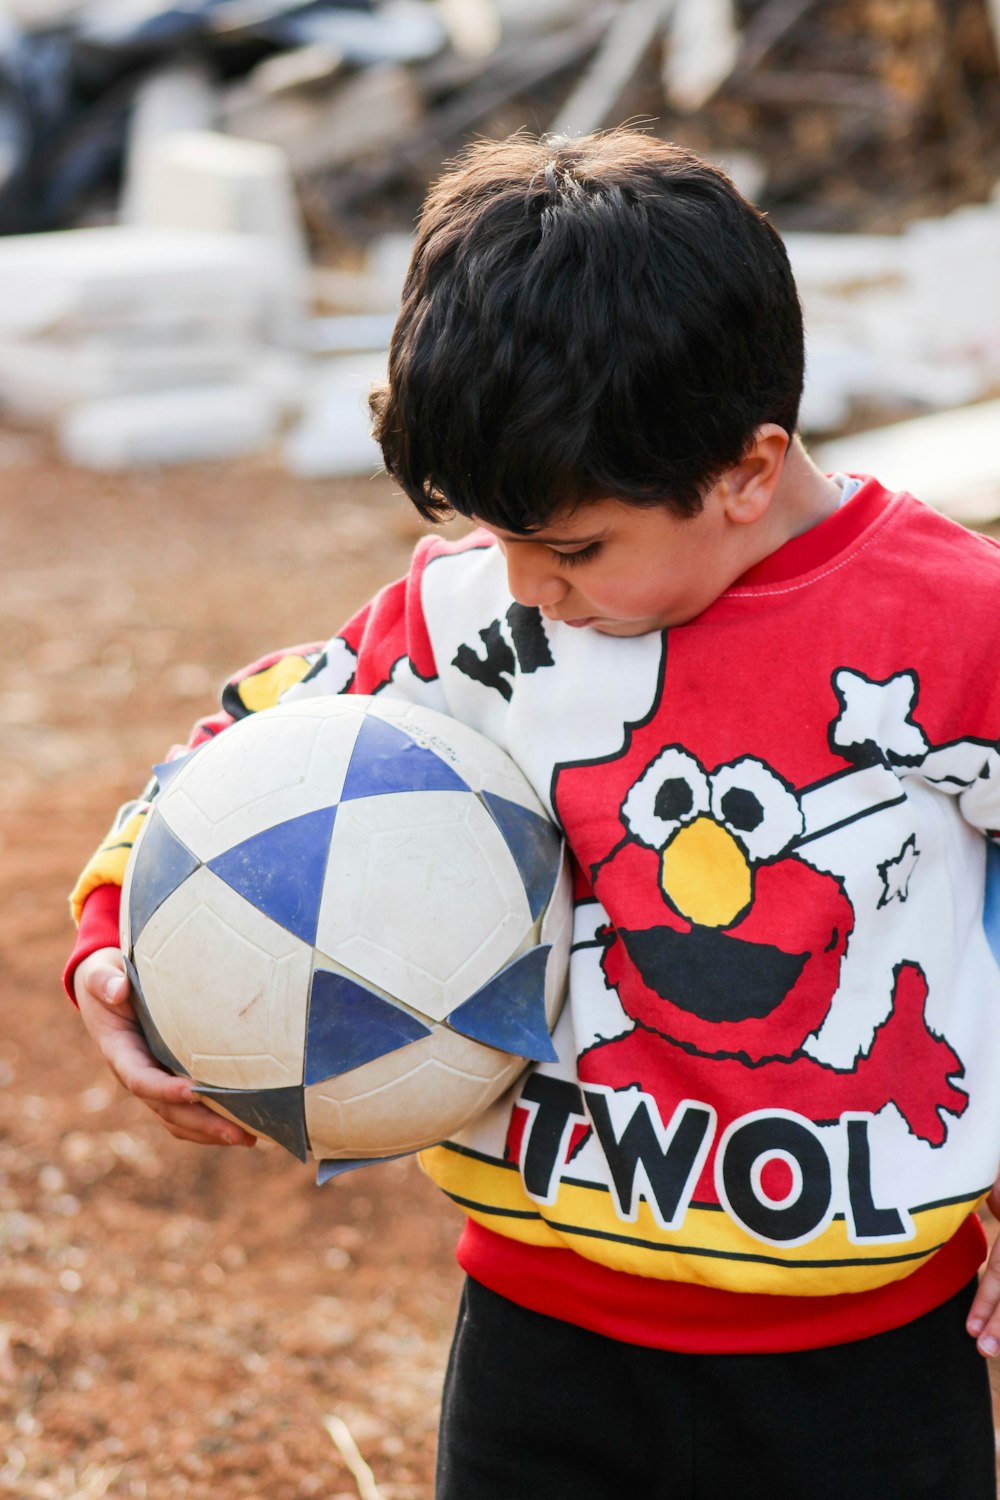 a young boy holding a soccer ball in his hands